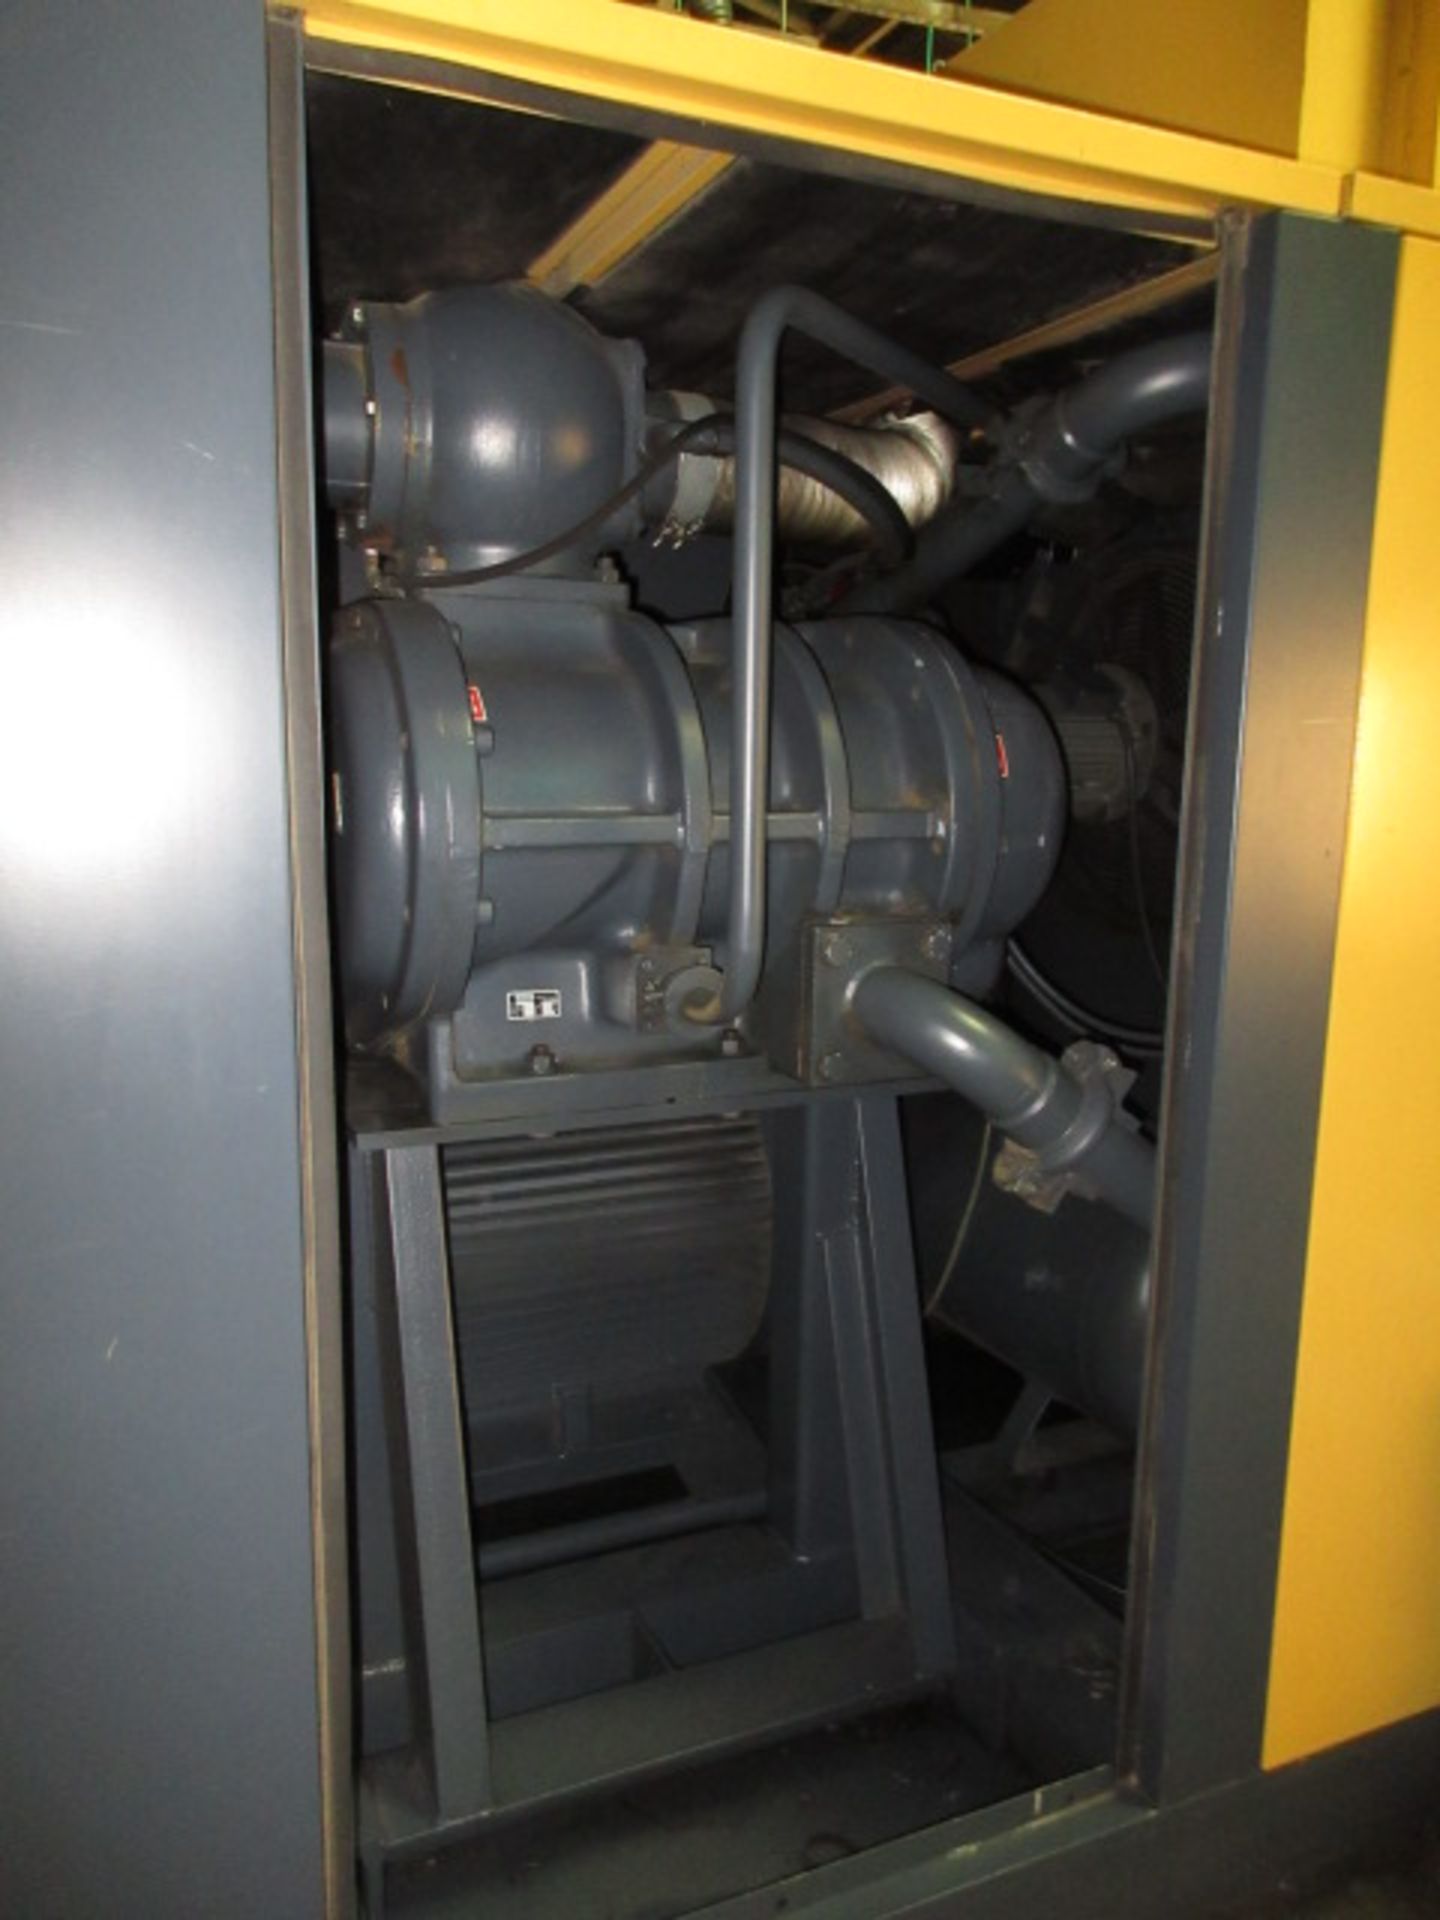 Kaeser ES 300 Sigma Profile Rotary Screw Air Compressor, (1995), service/load hrs. showing 1883/ - Image 3 of 9